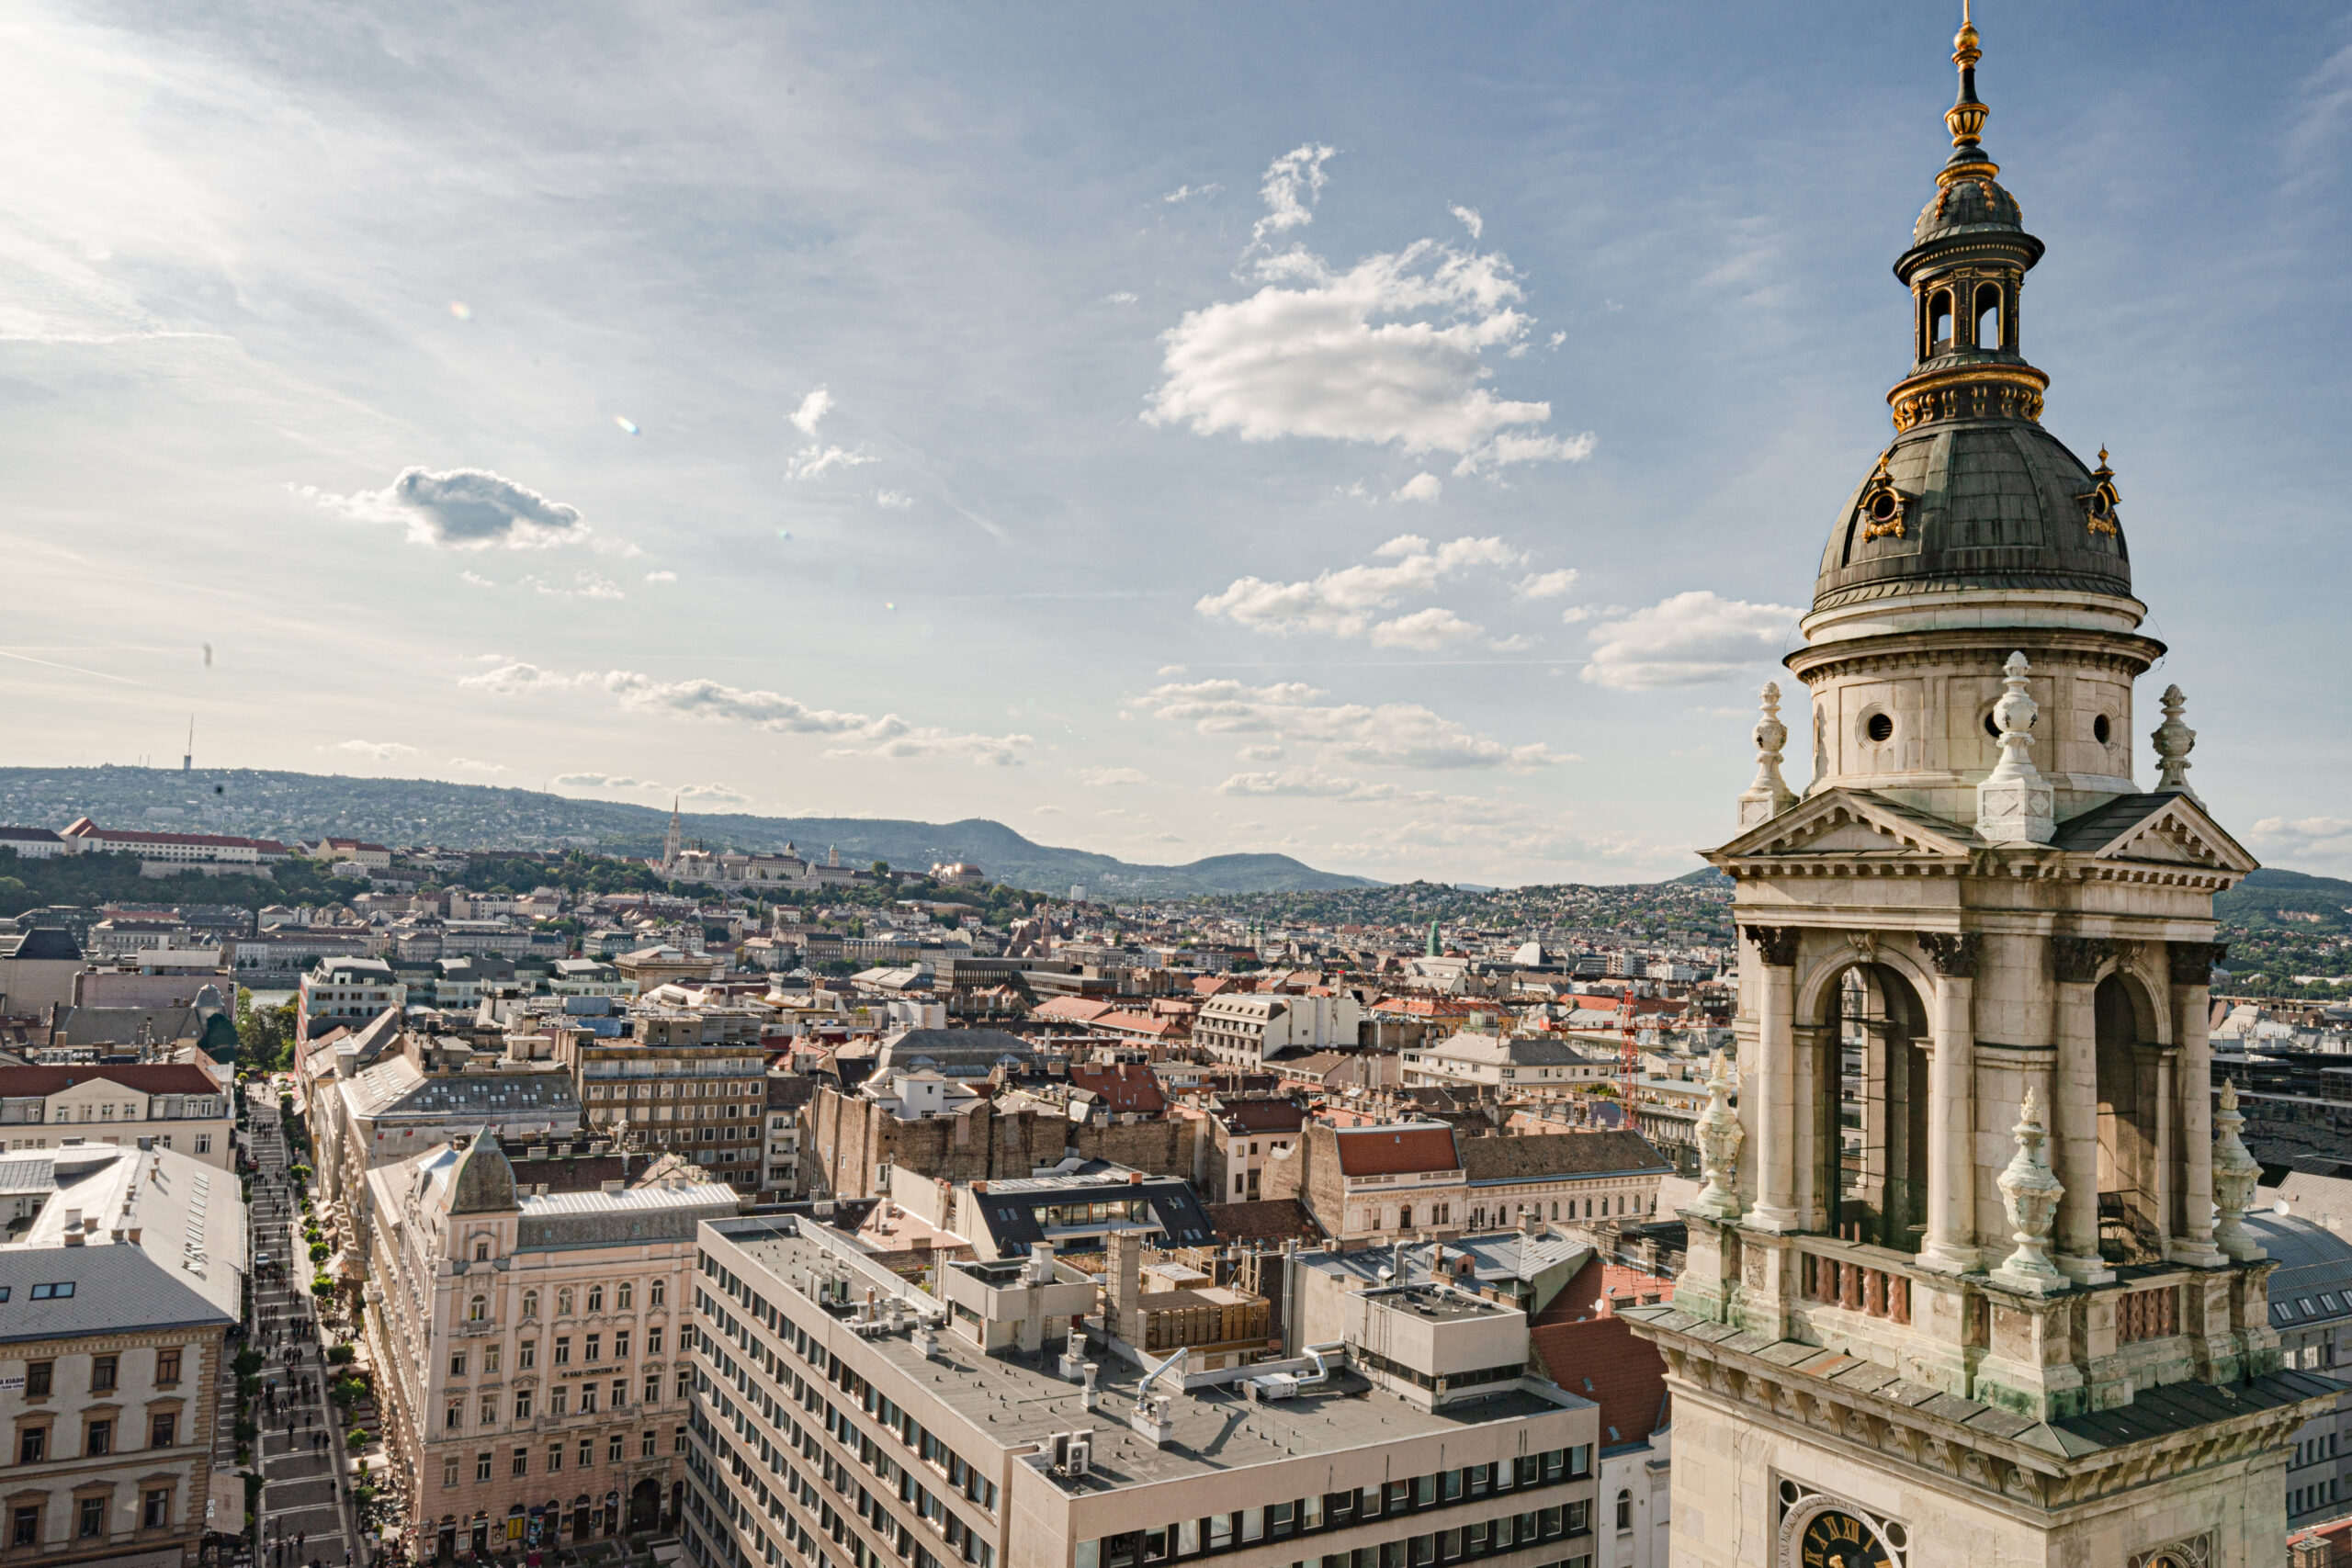 Breathtaking view from the top of the St. Stephen’s Basilica